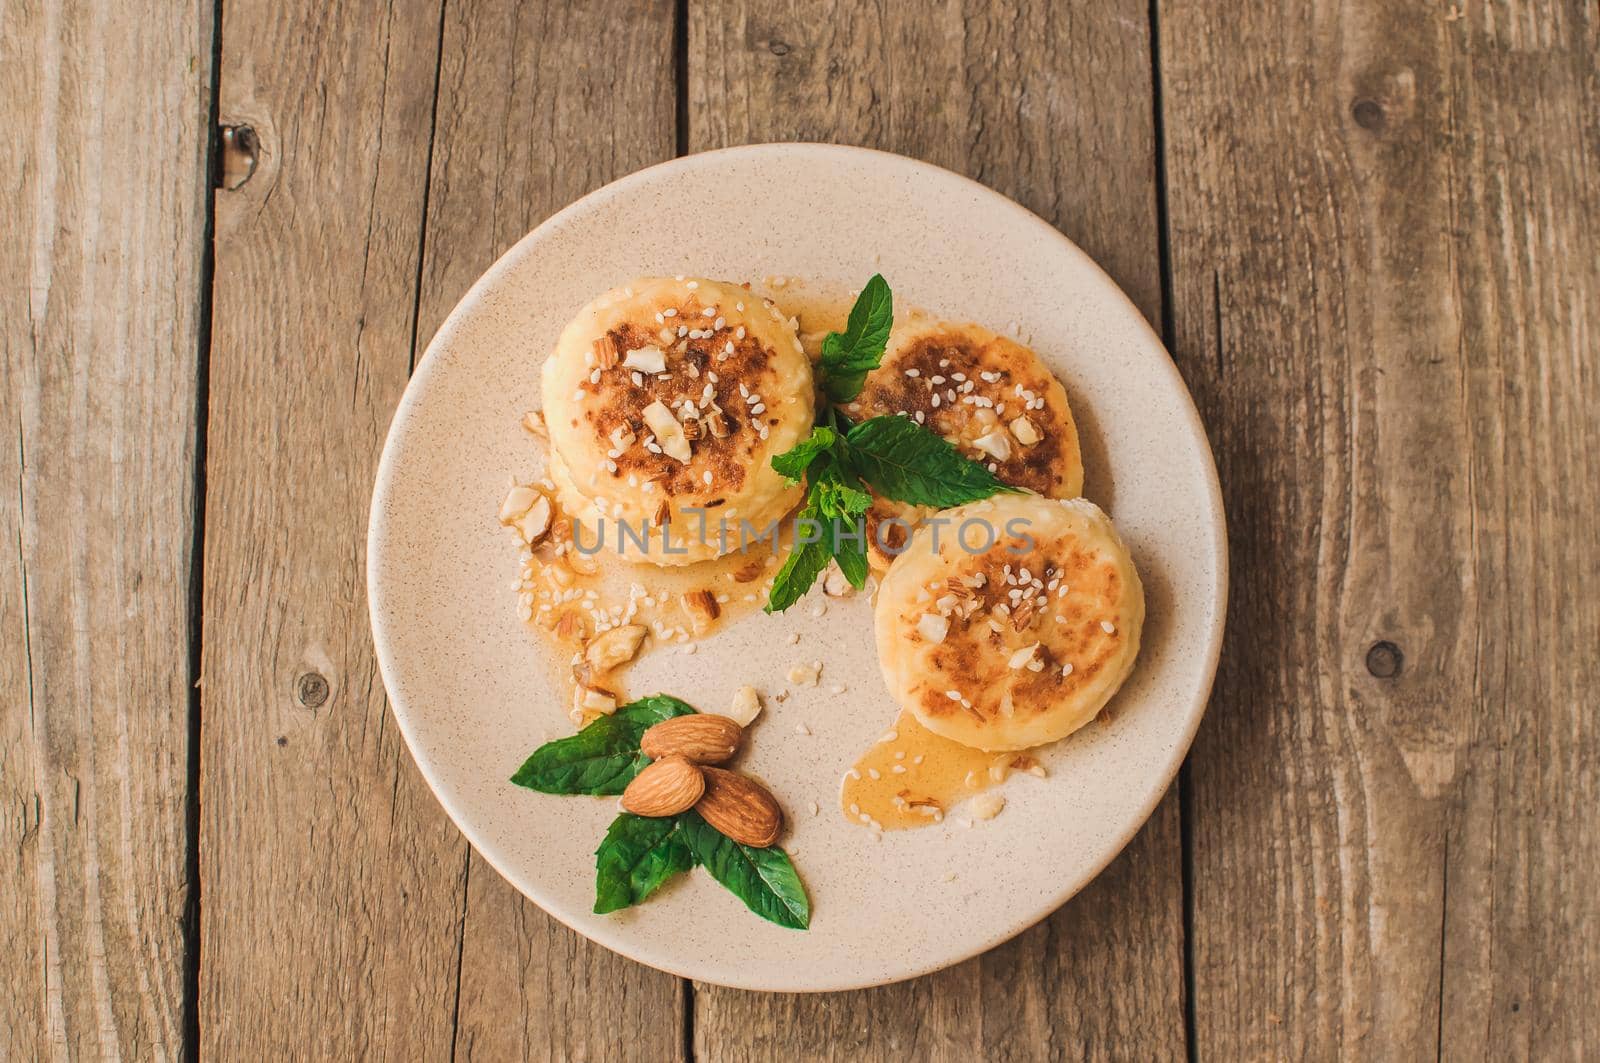 Delicious breakfast - cottage cheese pancakes,cheesecakes, cottage cheese pancakes with almonds, mint and maple syrup in a beige plate.Useful dessert on a wooden table in rustic style.Selective focus.